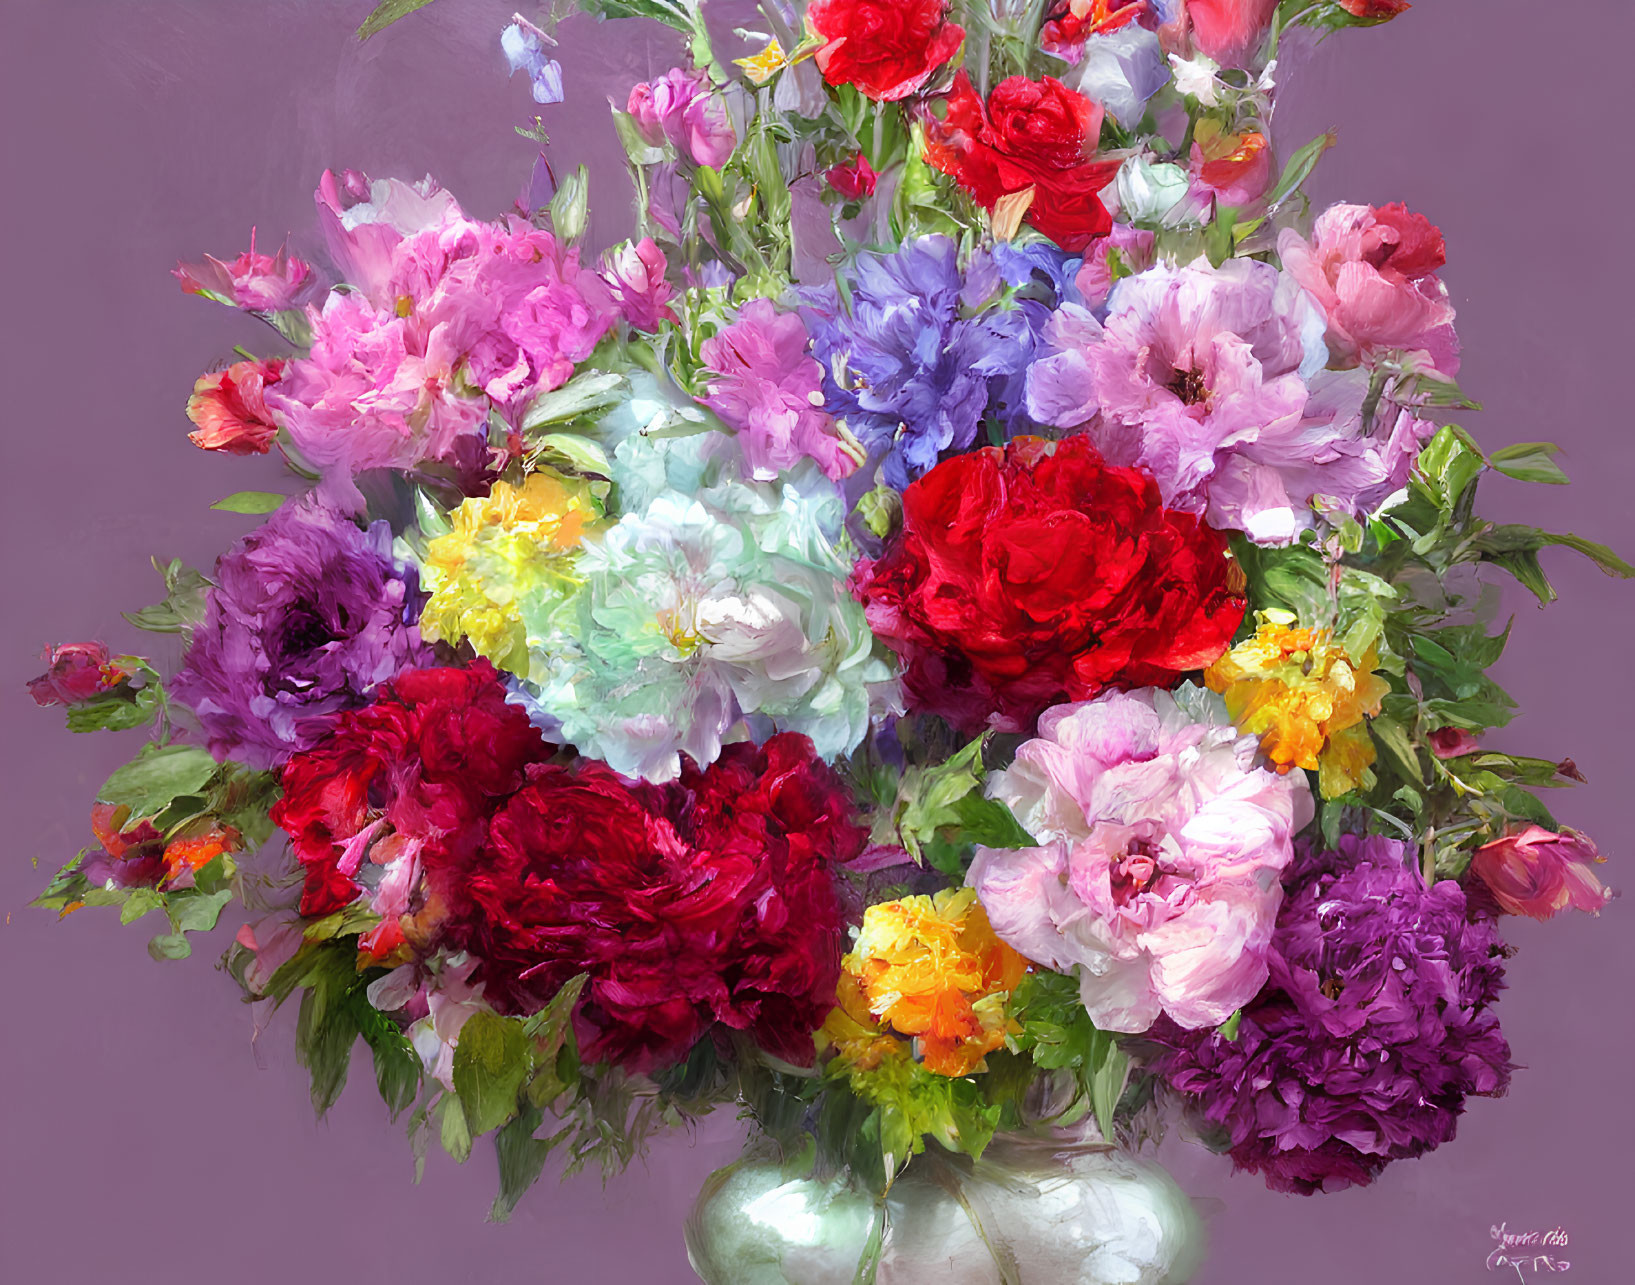 Assorted vibrant flowers in red, purple, pink, and yellow against a painterly purple background